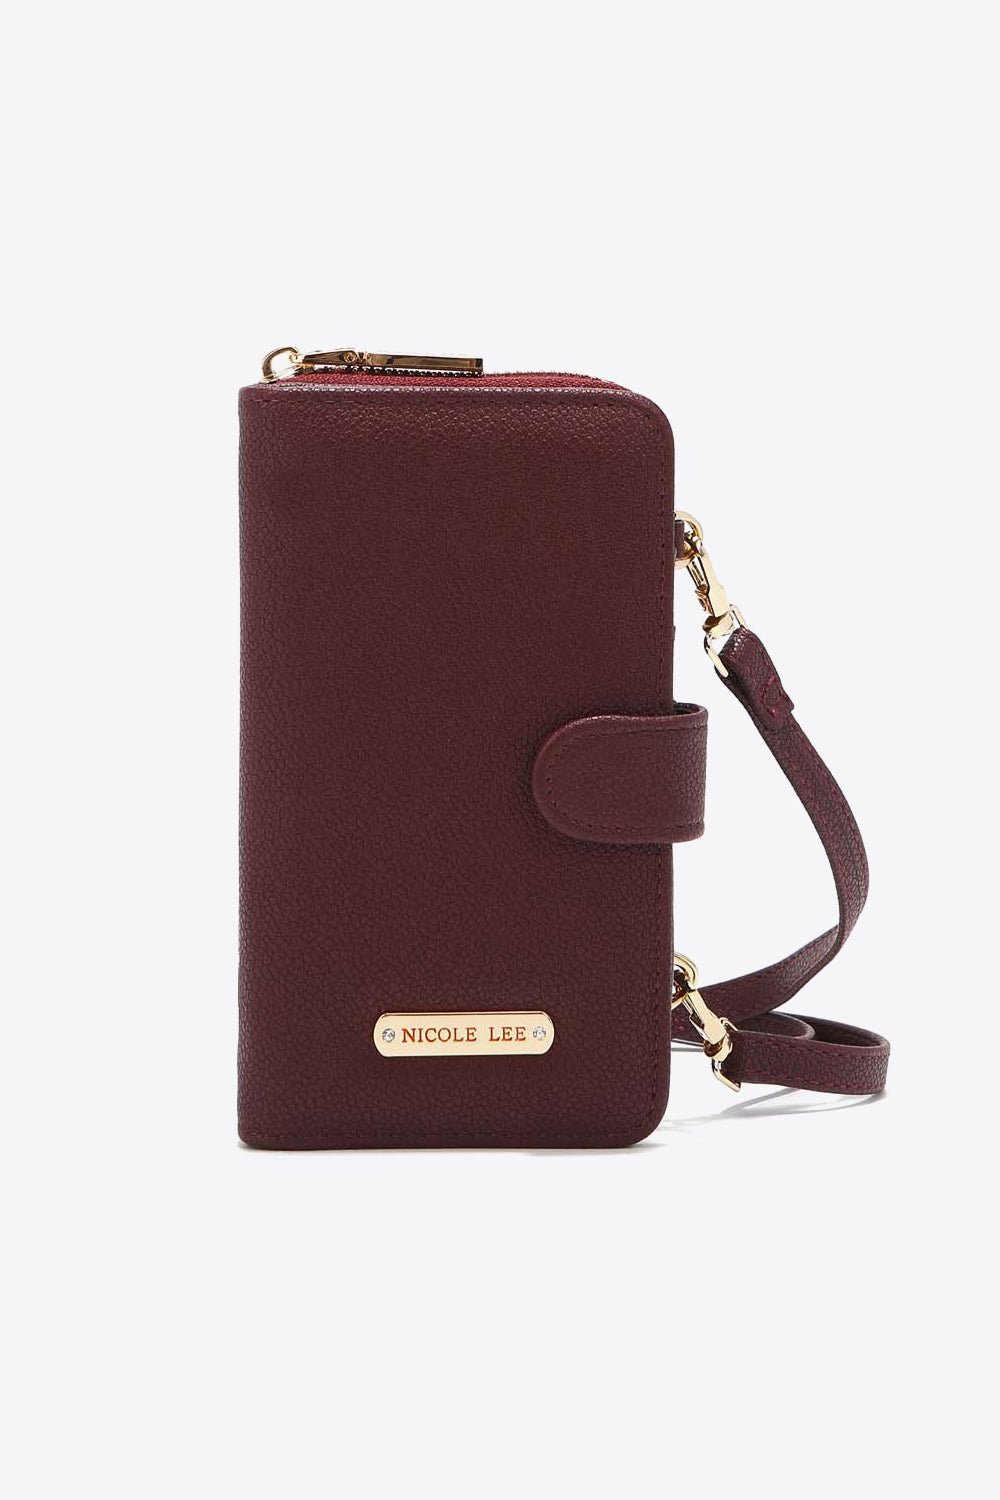 Nicole Lee USA Two - Piece Crossbody Phone Case Wallet - OMG! Rose